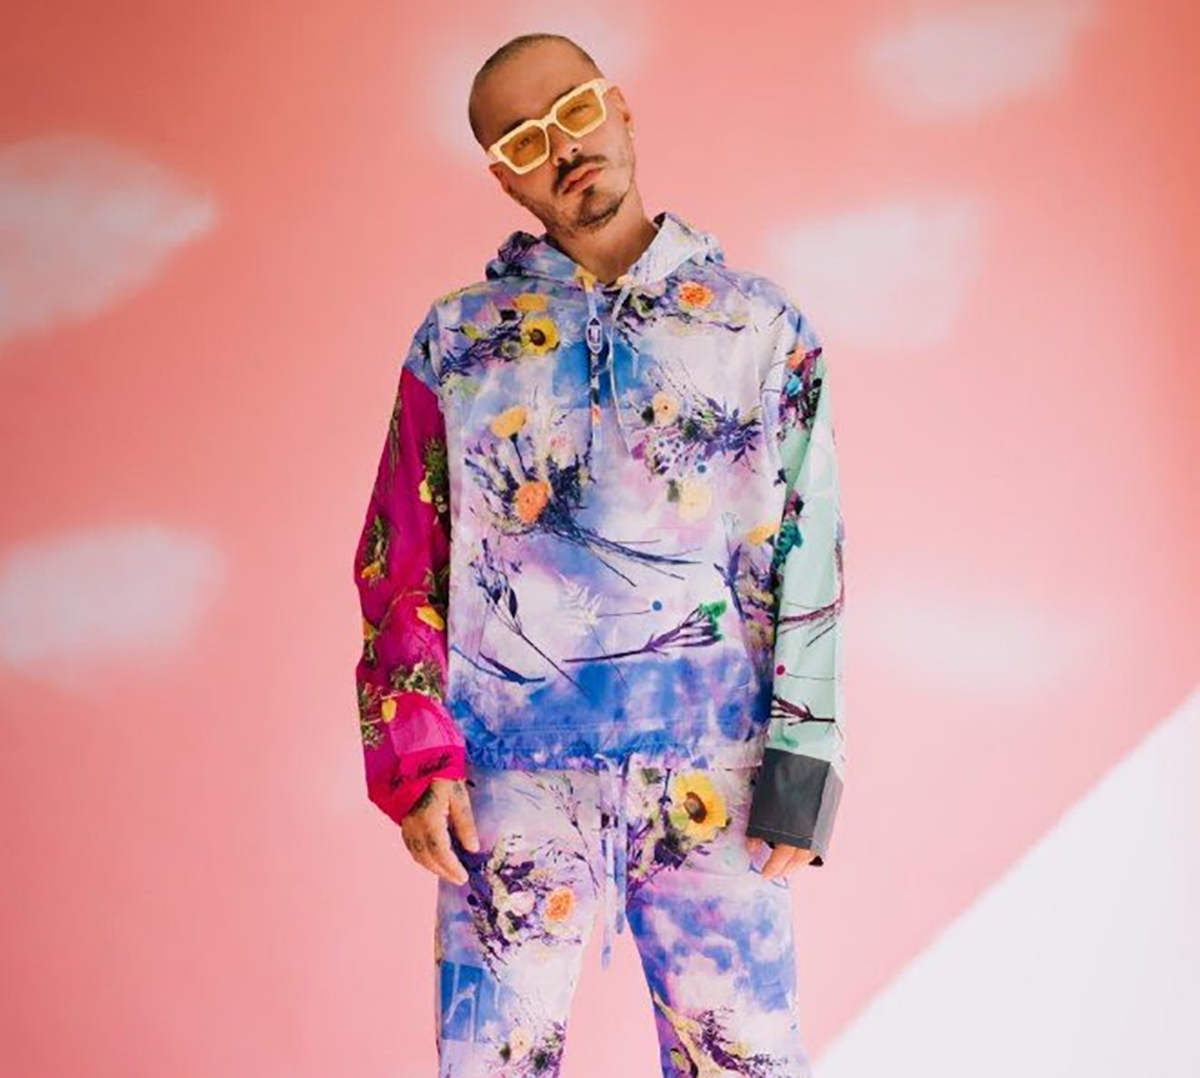 J Balvin launches his most intimate and personal album ‘Jose’: “You have to stop deifying artists”